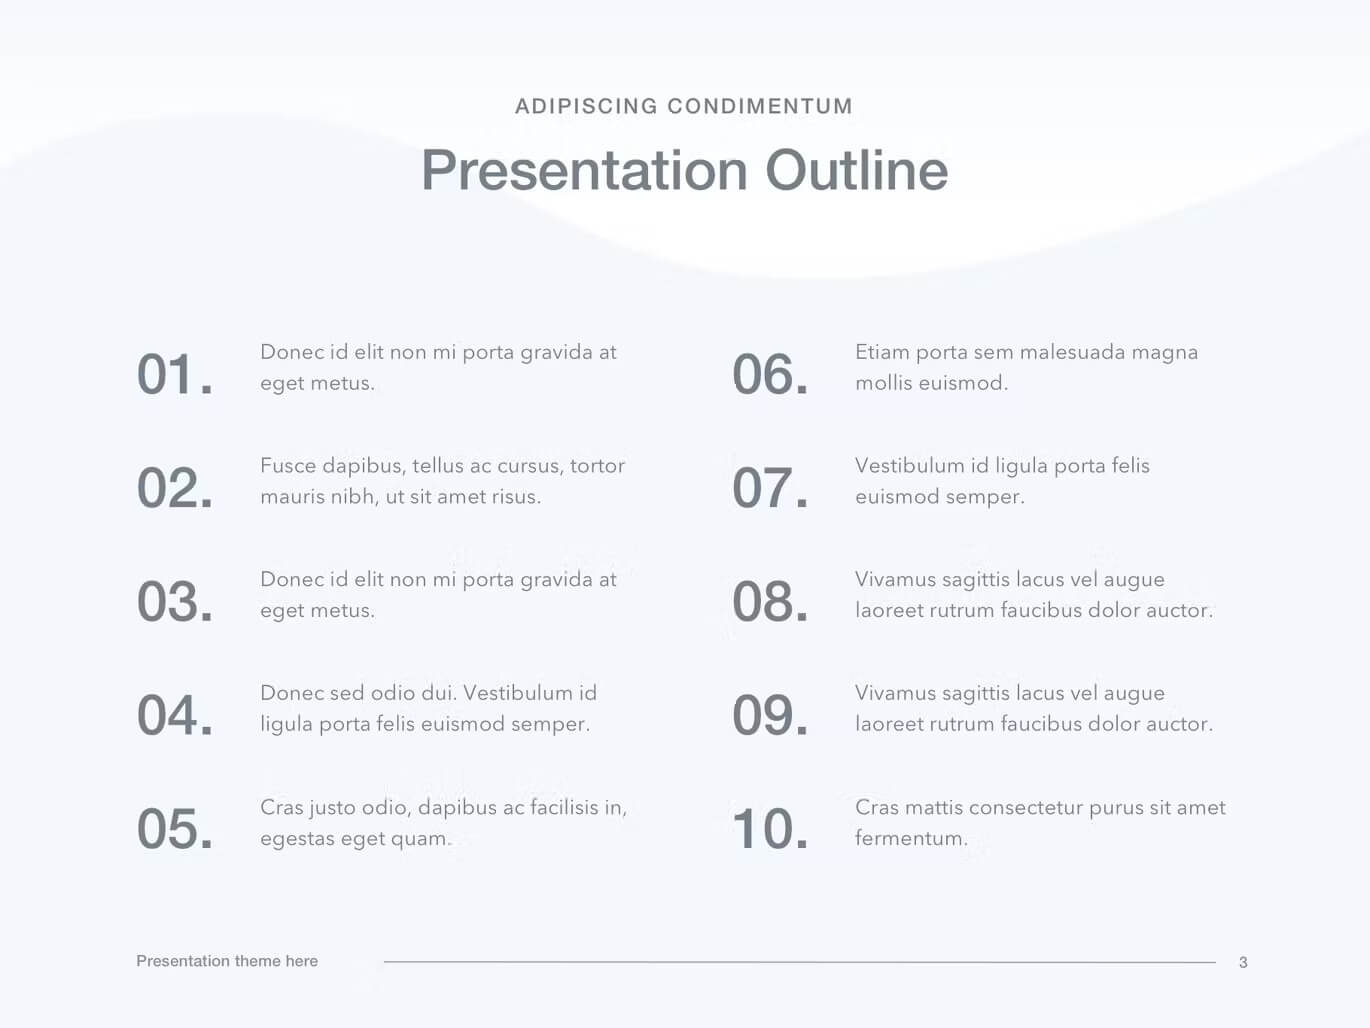 Presentation Outline of Sales Funnel PowerPoint Template.